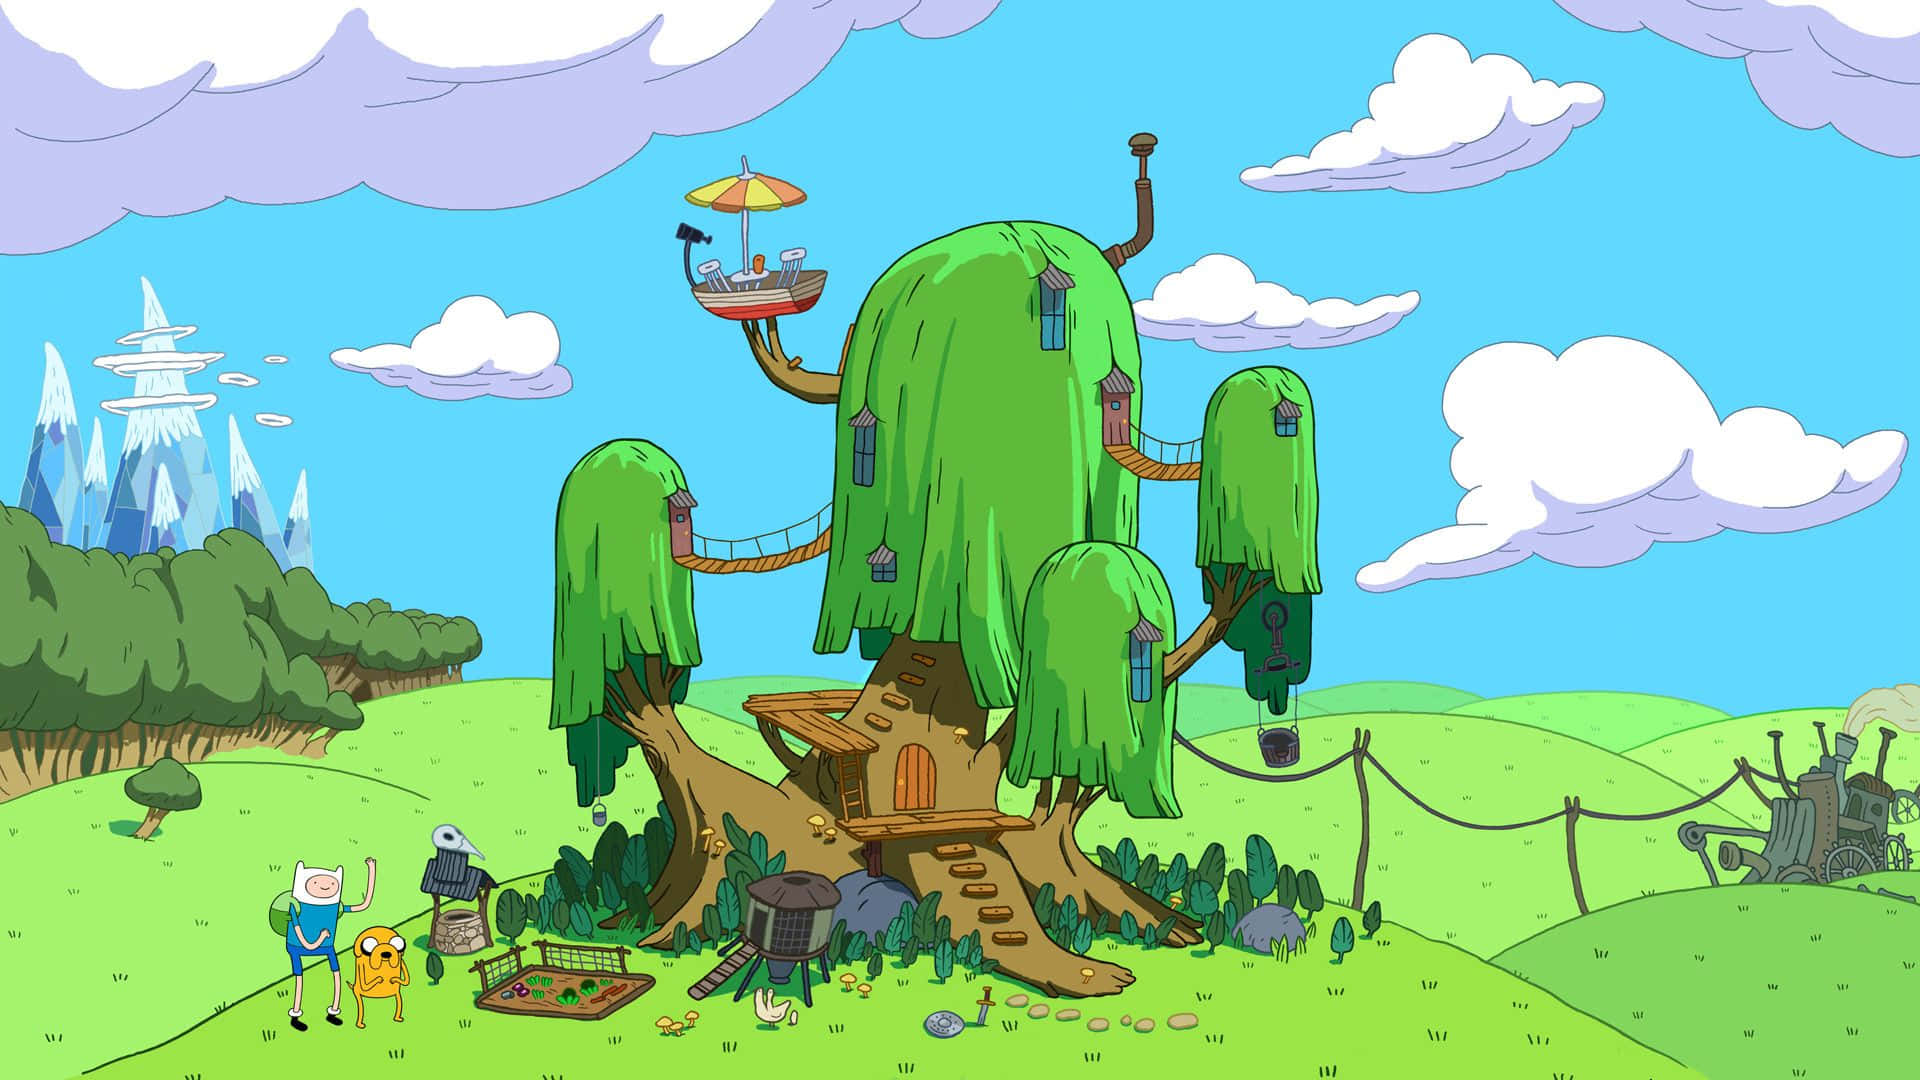 Enjoy An Epic Adventure in Landscapes like This One from Adventure Time Wallpaper